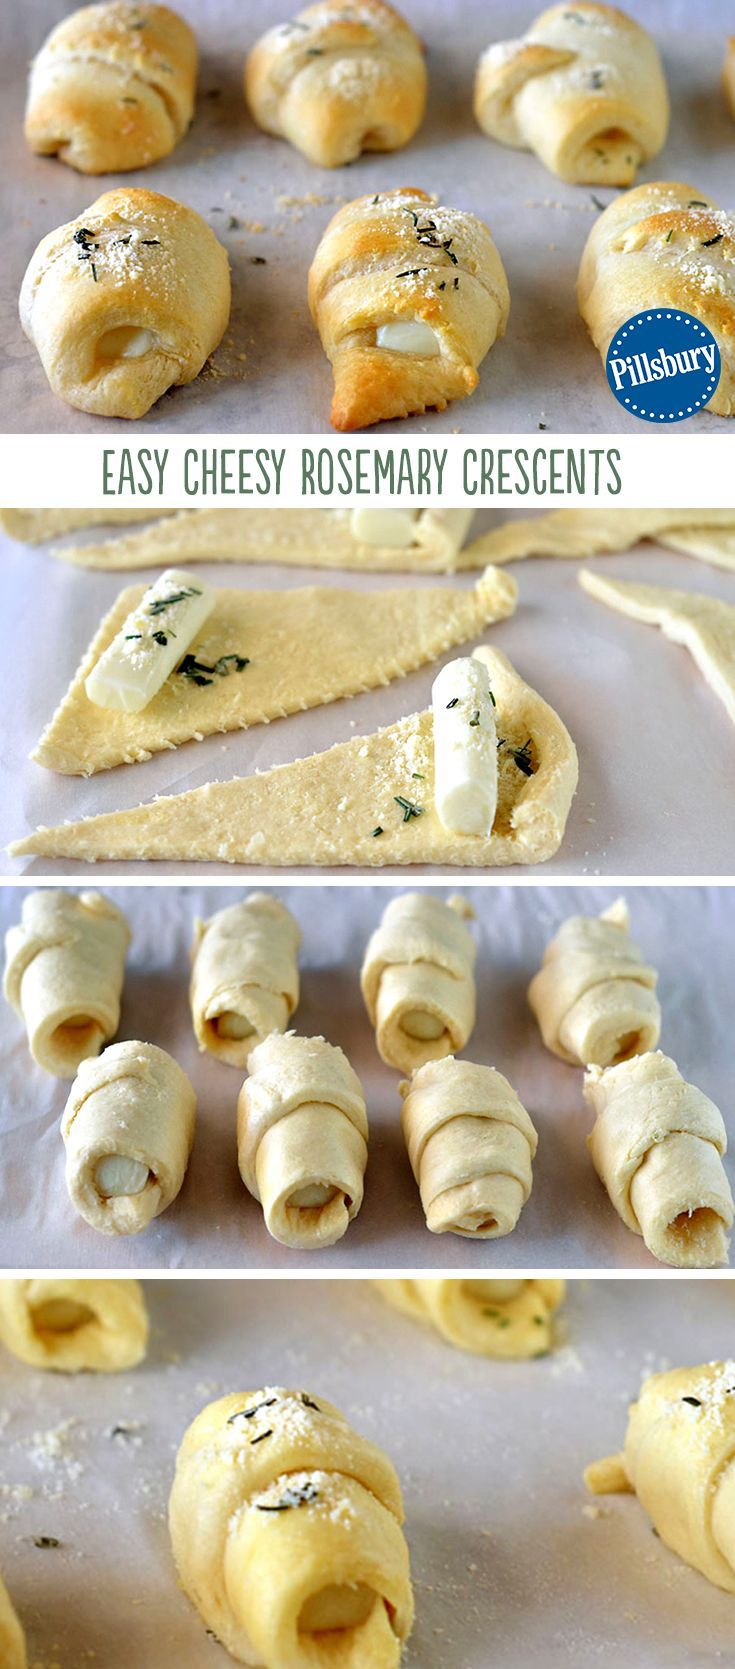 Our taste buds are drooling for this easy side bread! Golden rosemary crescents with a surprise cheesy center make an excellent